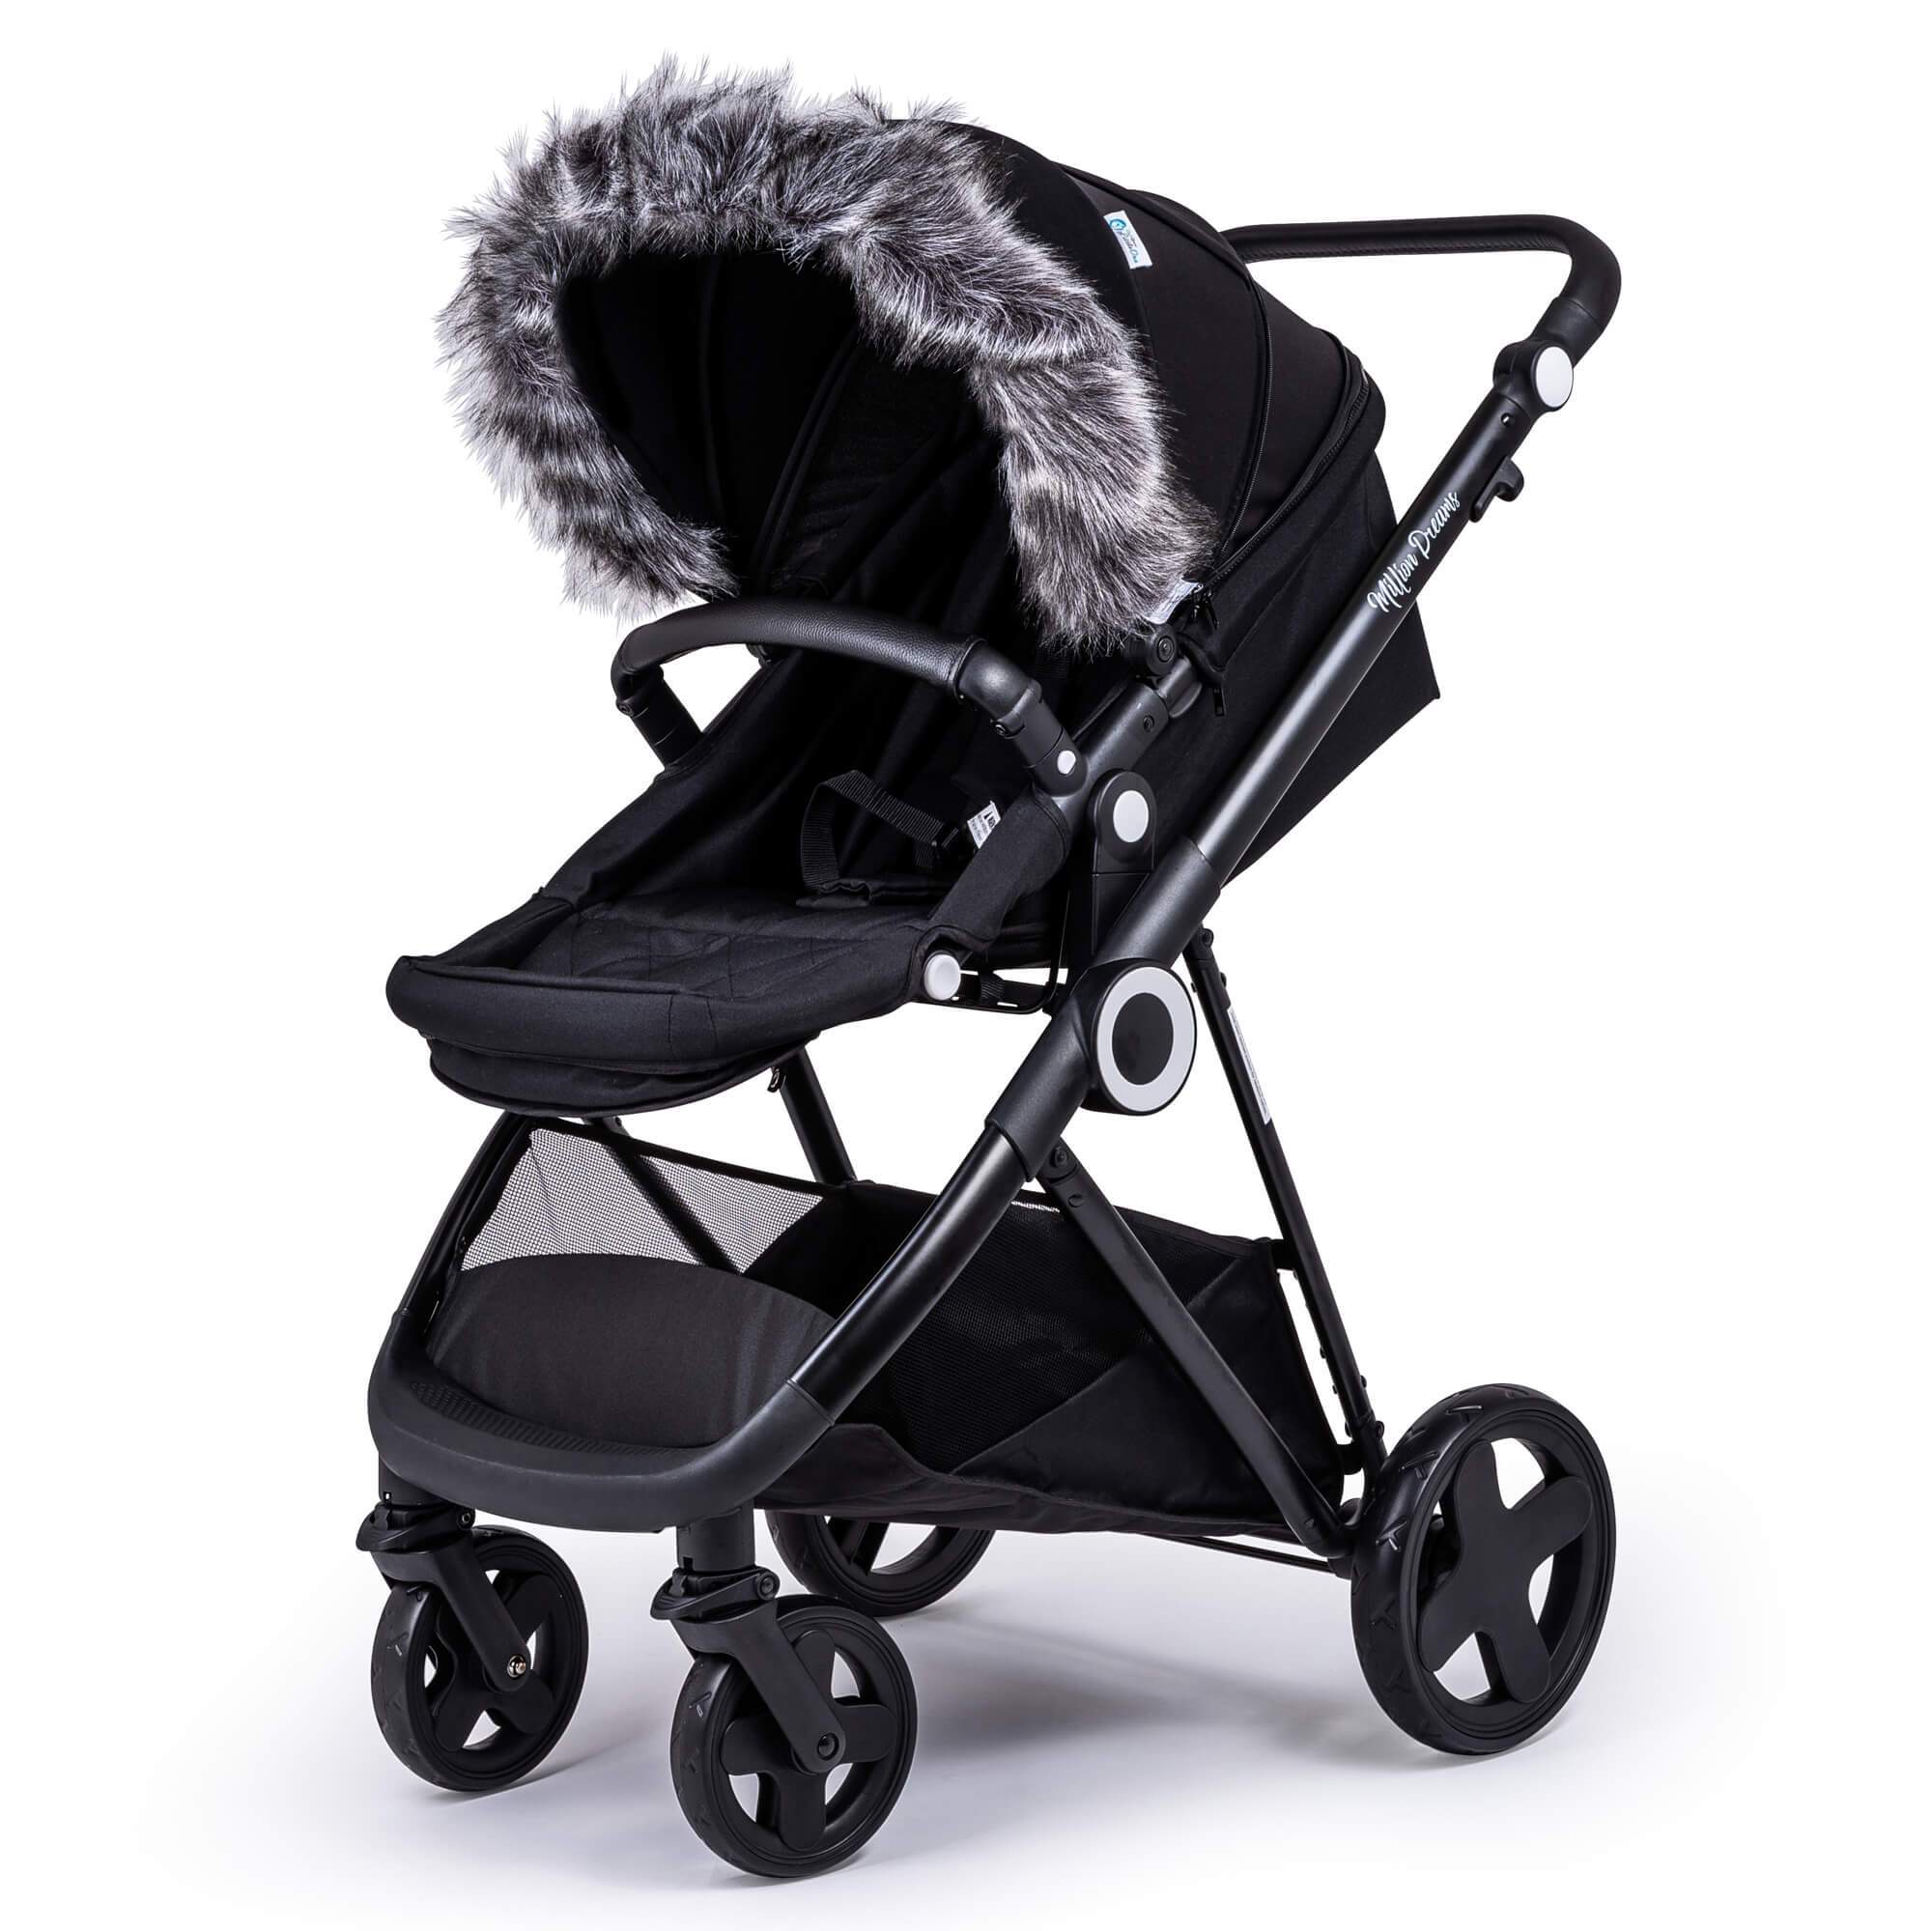 Pram Fur Hood Trim Attachment for Pushchair Compatible with Joie - Dark Grey / Fits All Models | For Your Little One